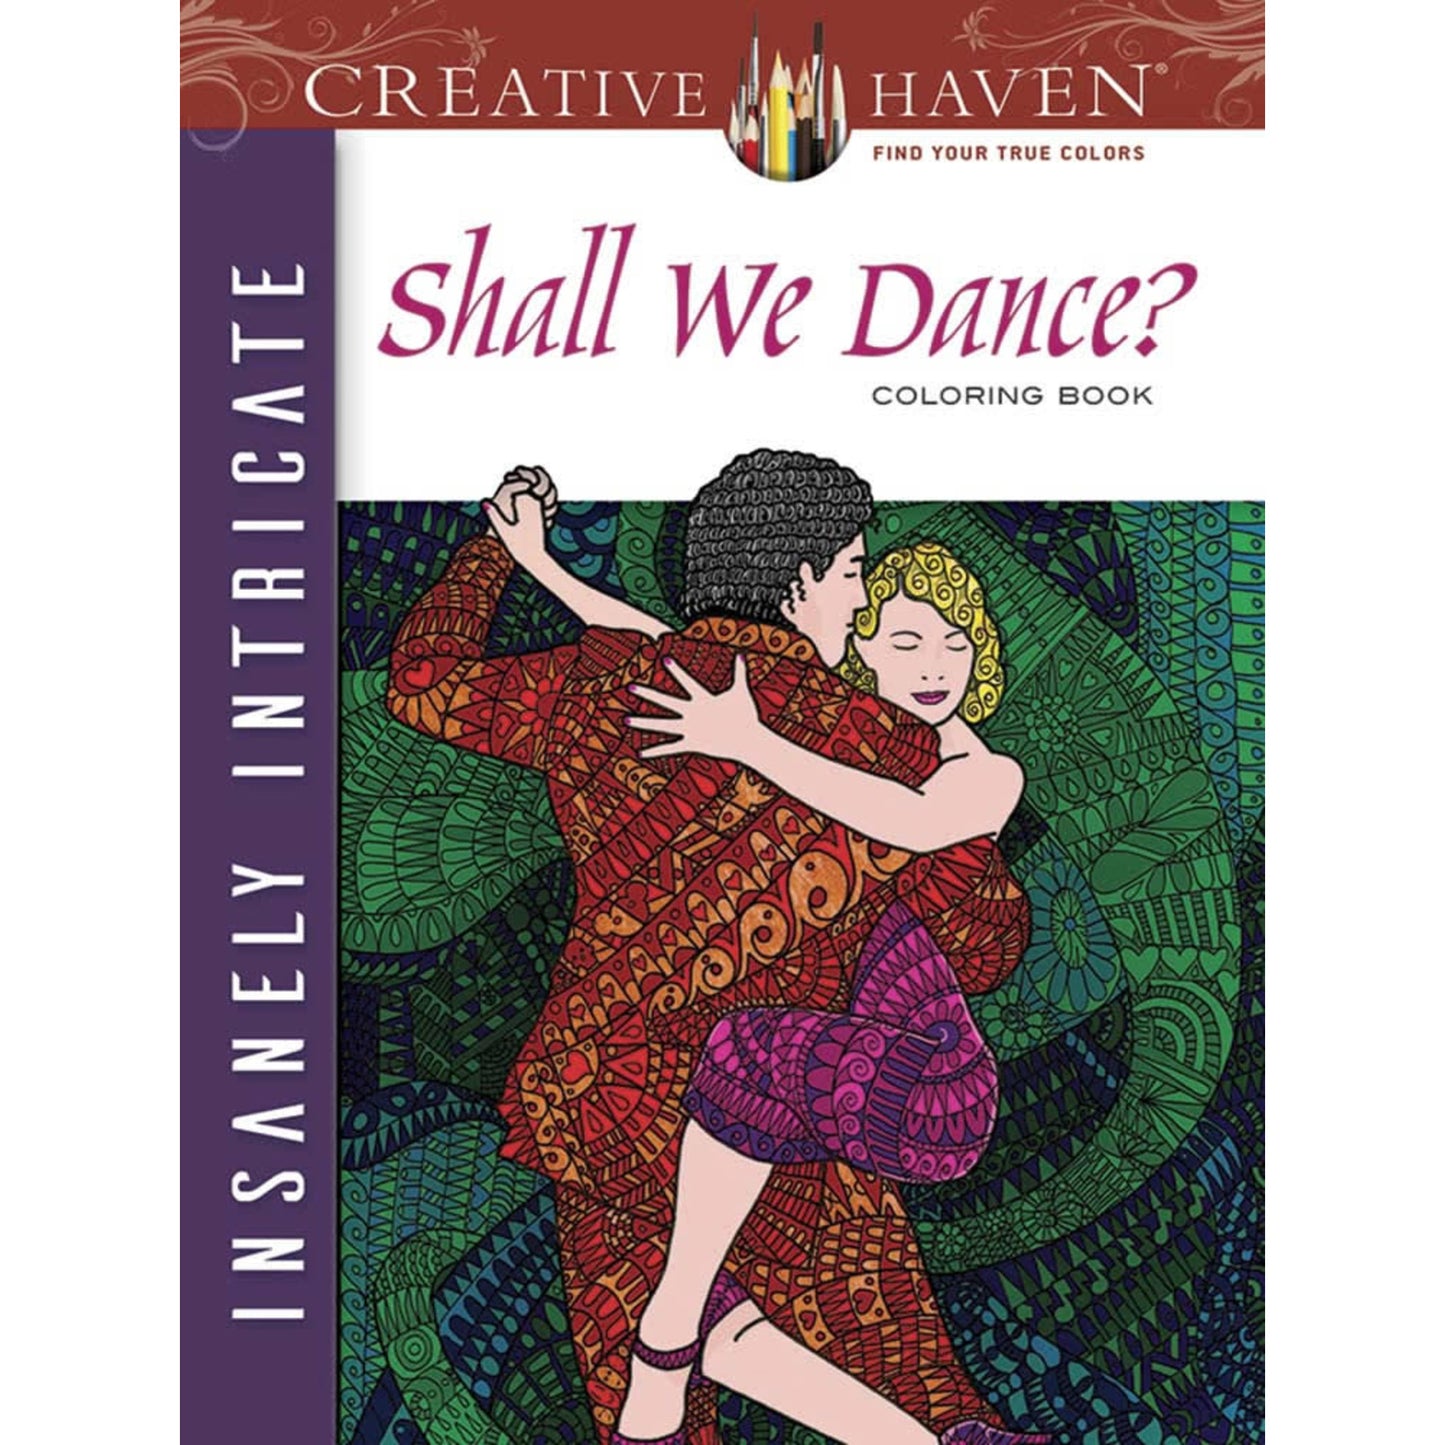 Shall We Dance? Coloring Book, Evans